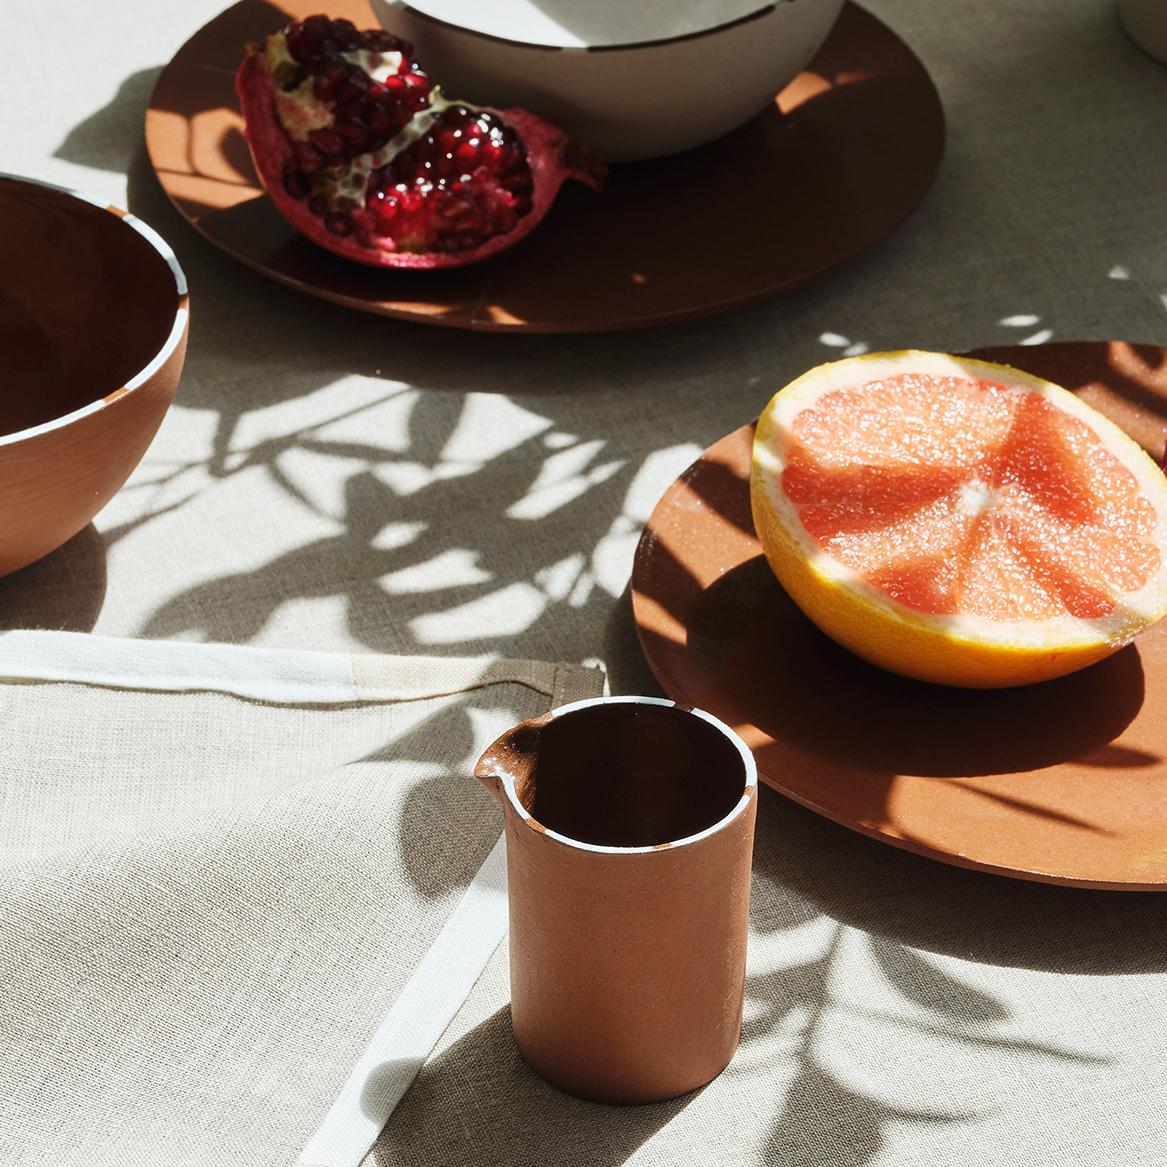 The pieces are slip cast in London, made from stoneware in small batches. The hand painted details around the rim of each item in the collection is created by glaze in a complimentary colour to the body of each piece.

CUSTHOM studio has developed